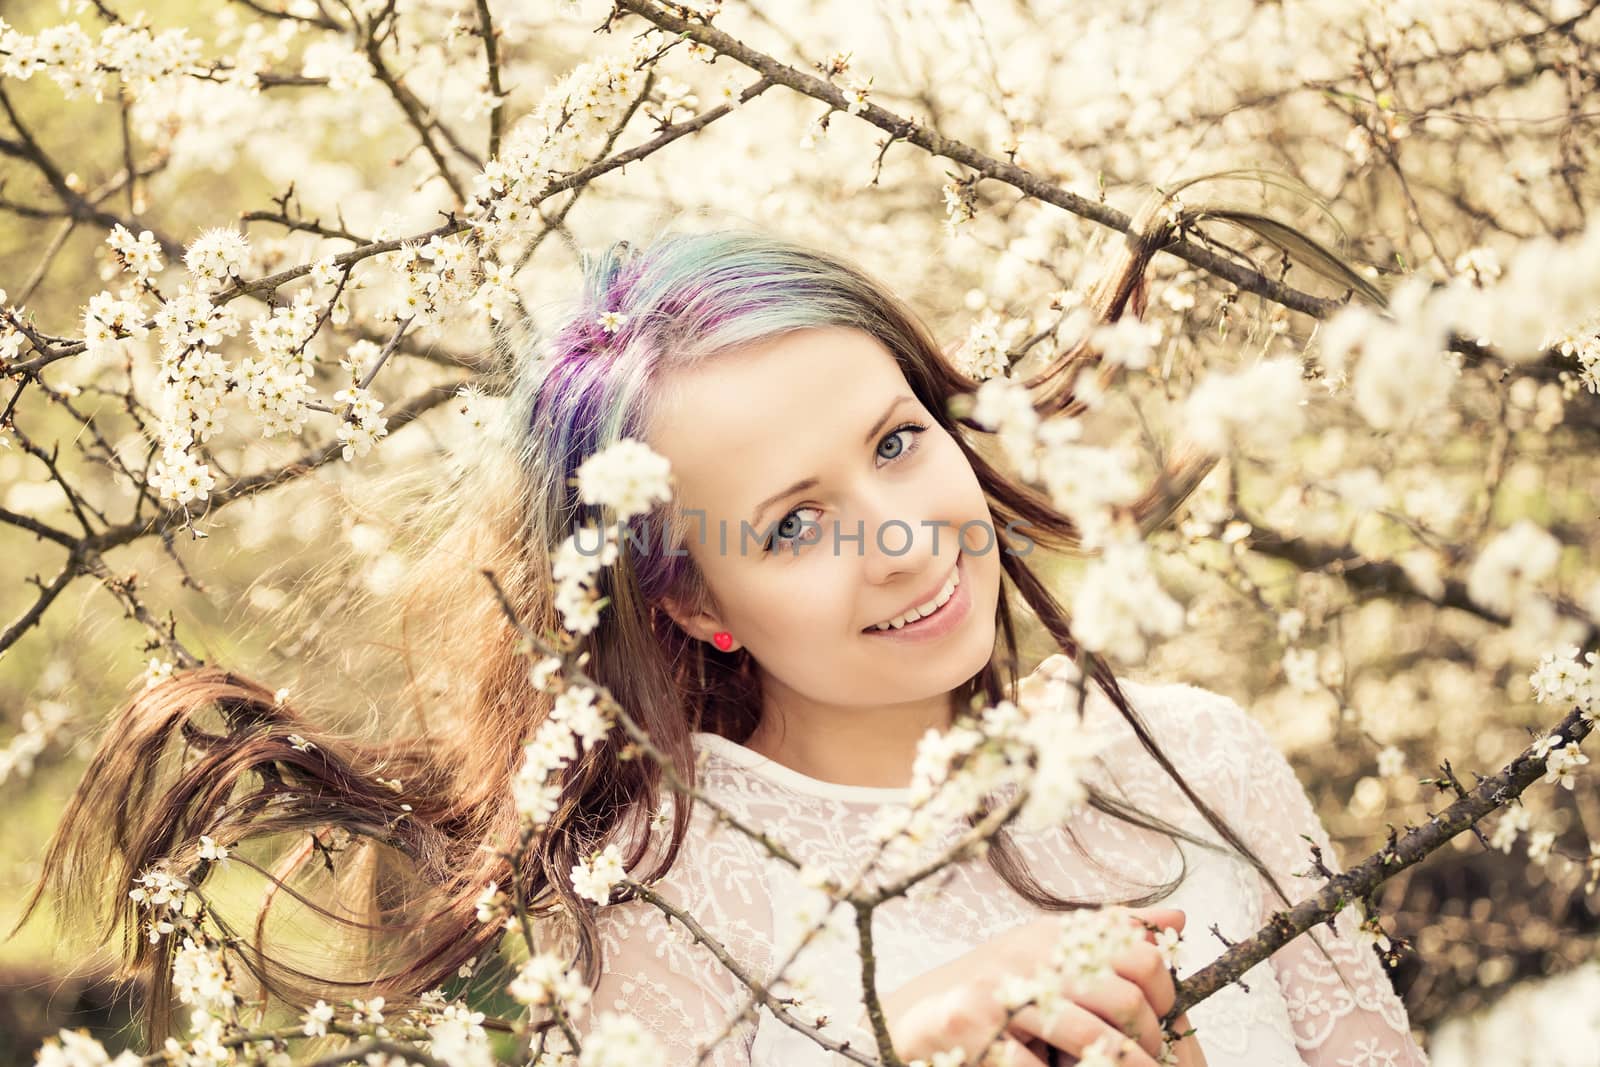 Portrait of cheerful fashionable woman in spring blooming tree, with flowers in hair, retro vintage color